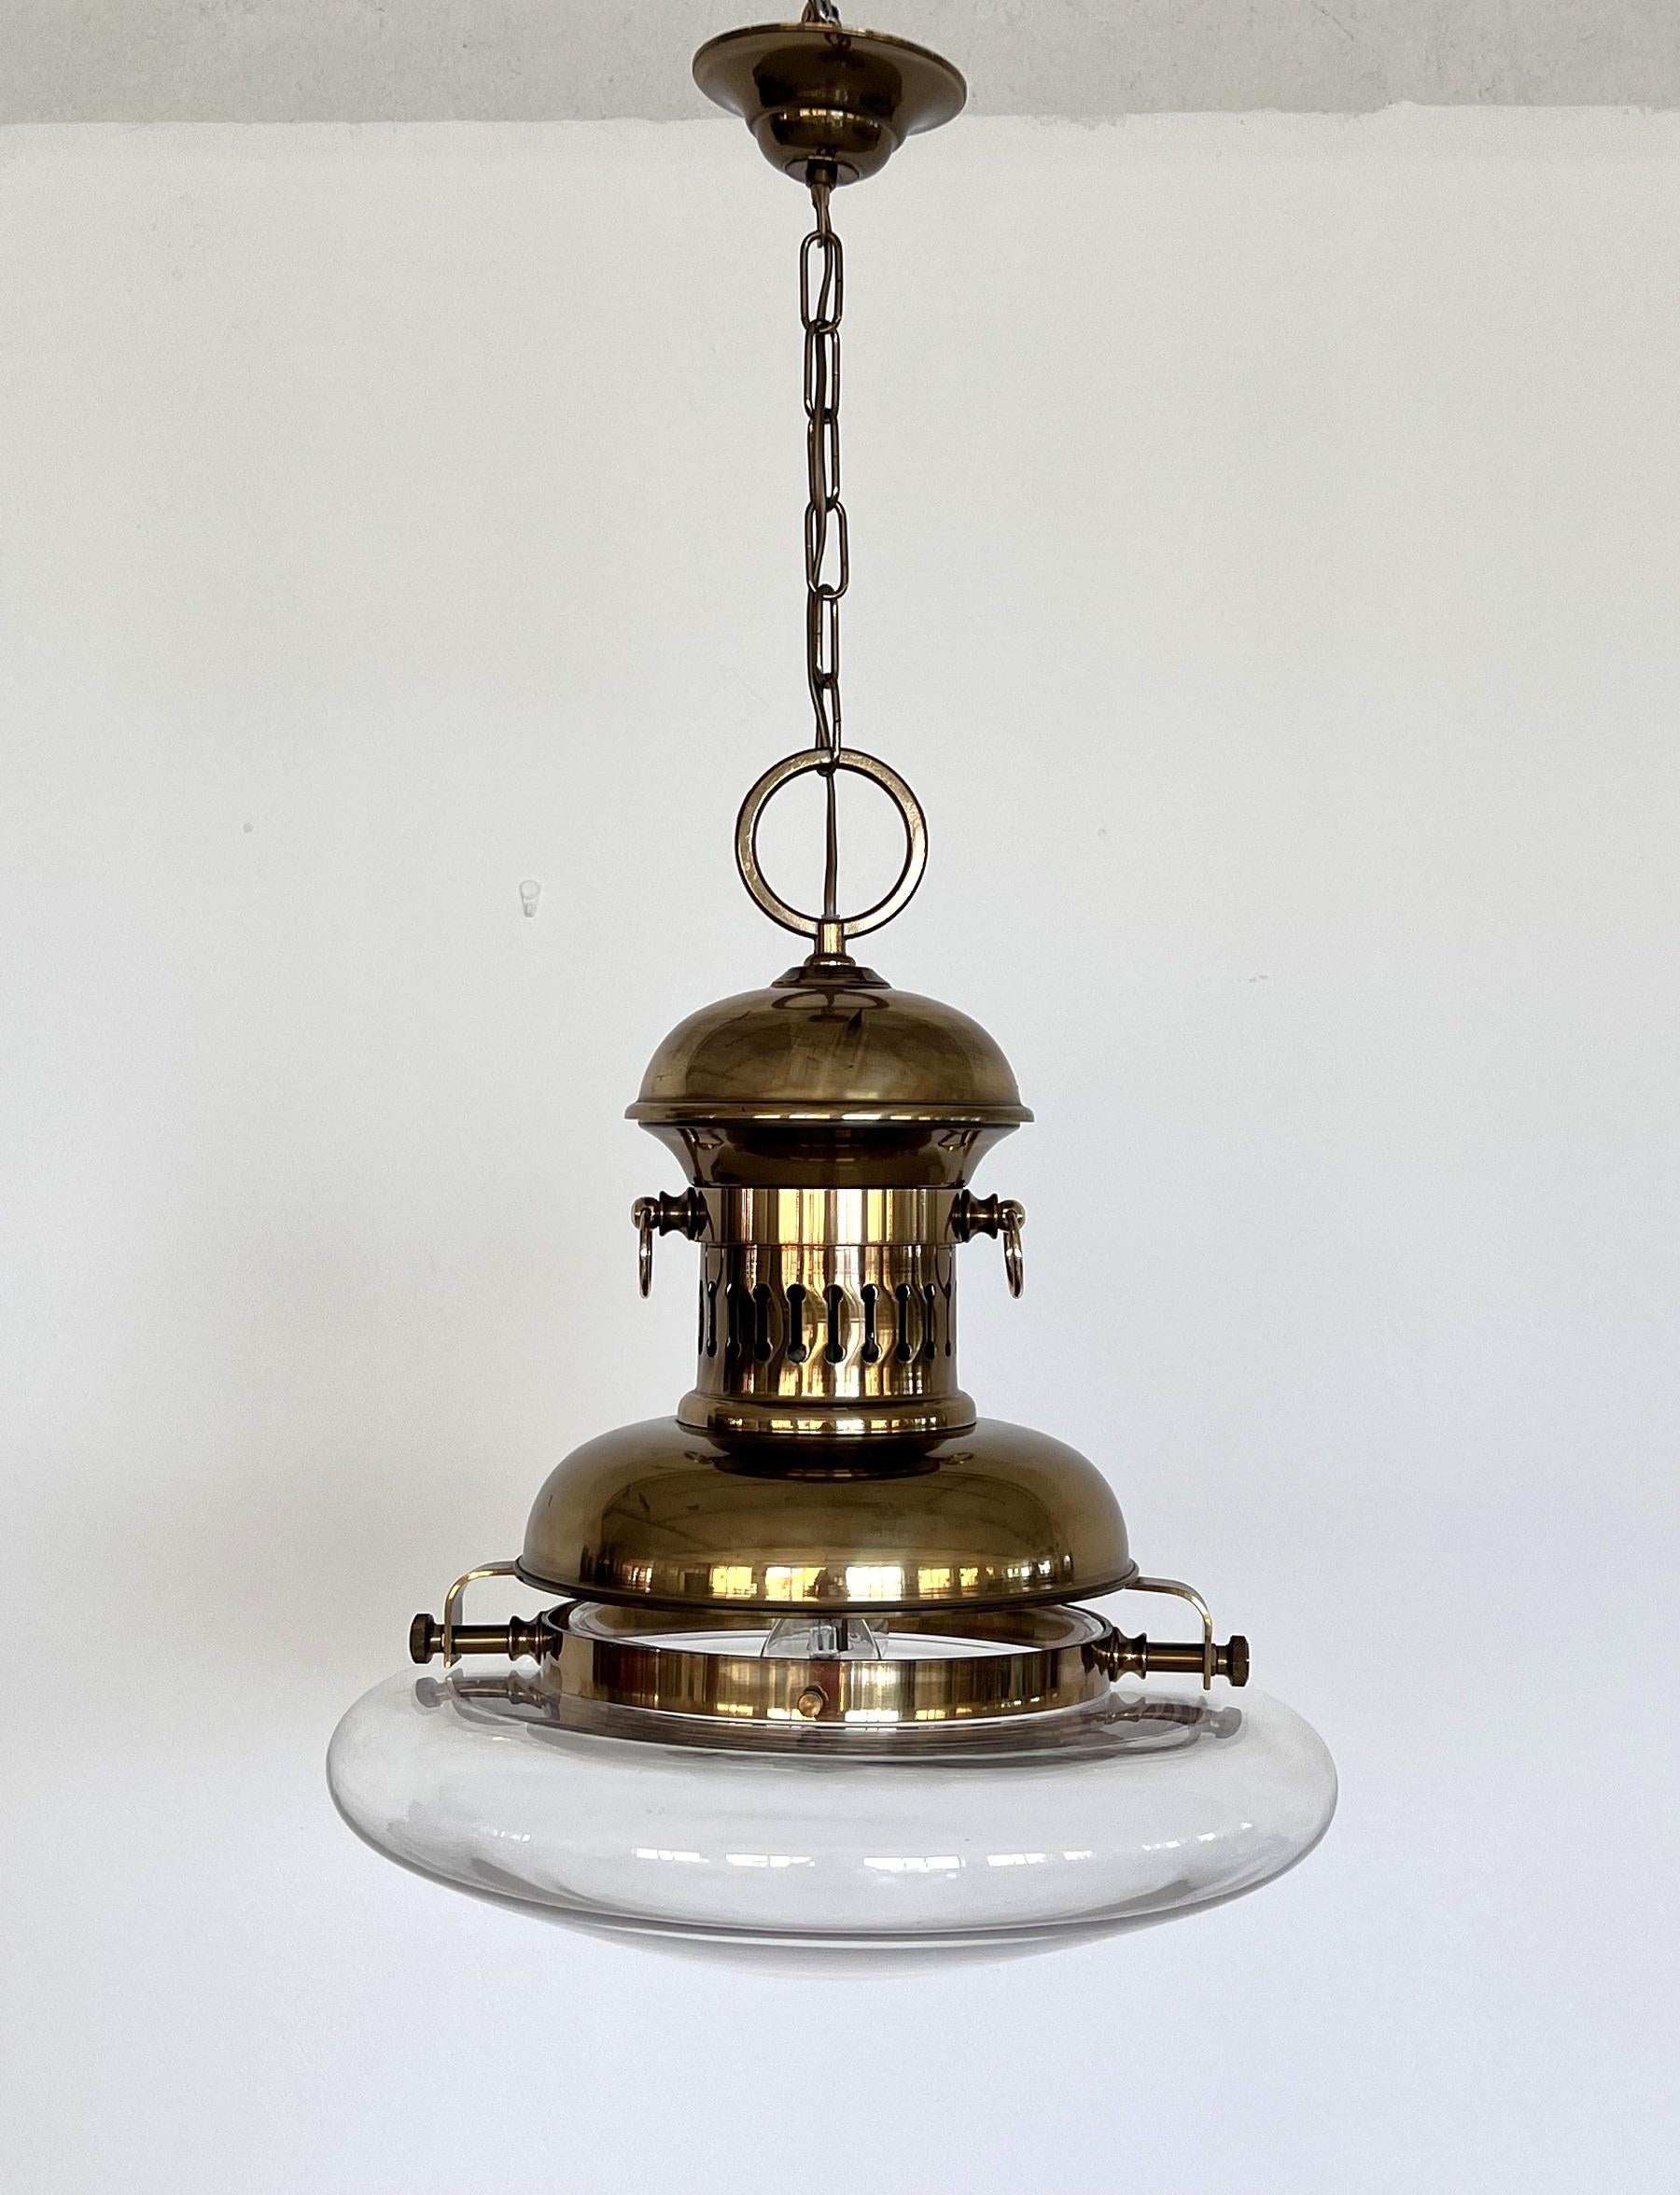 Italian Brass and Glass Pendant Lamp or Lantern in Nautical Style, 1970s For Sale 4